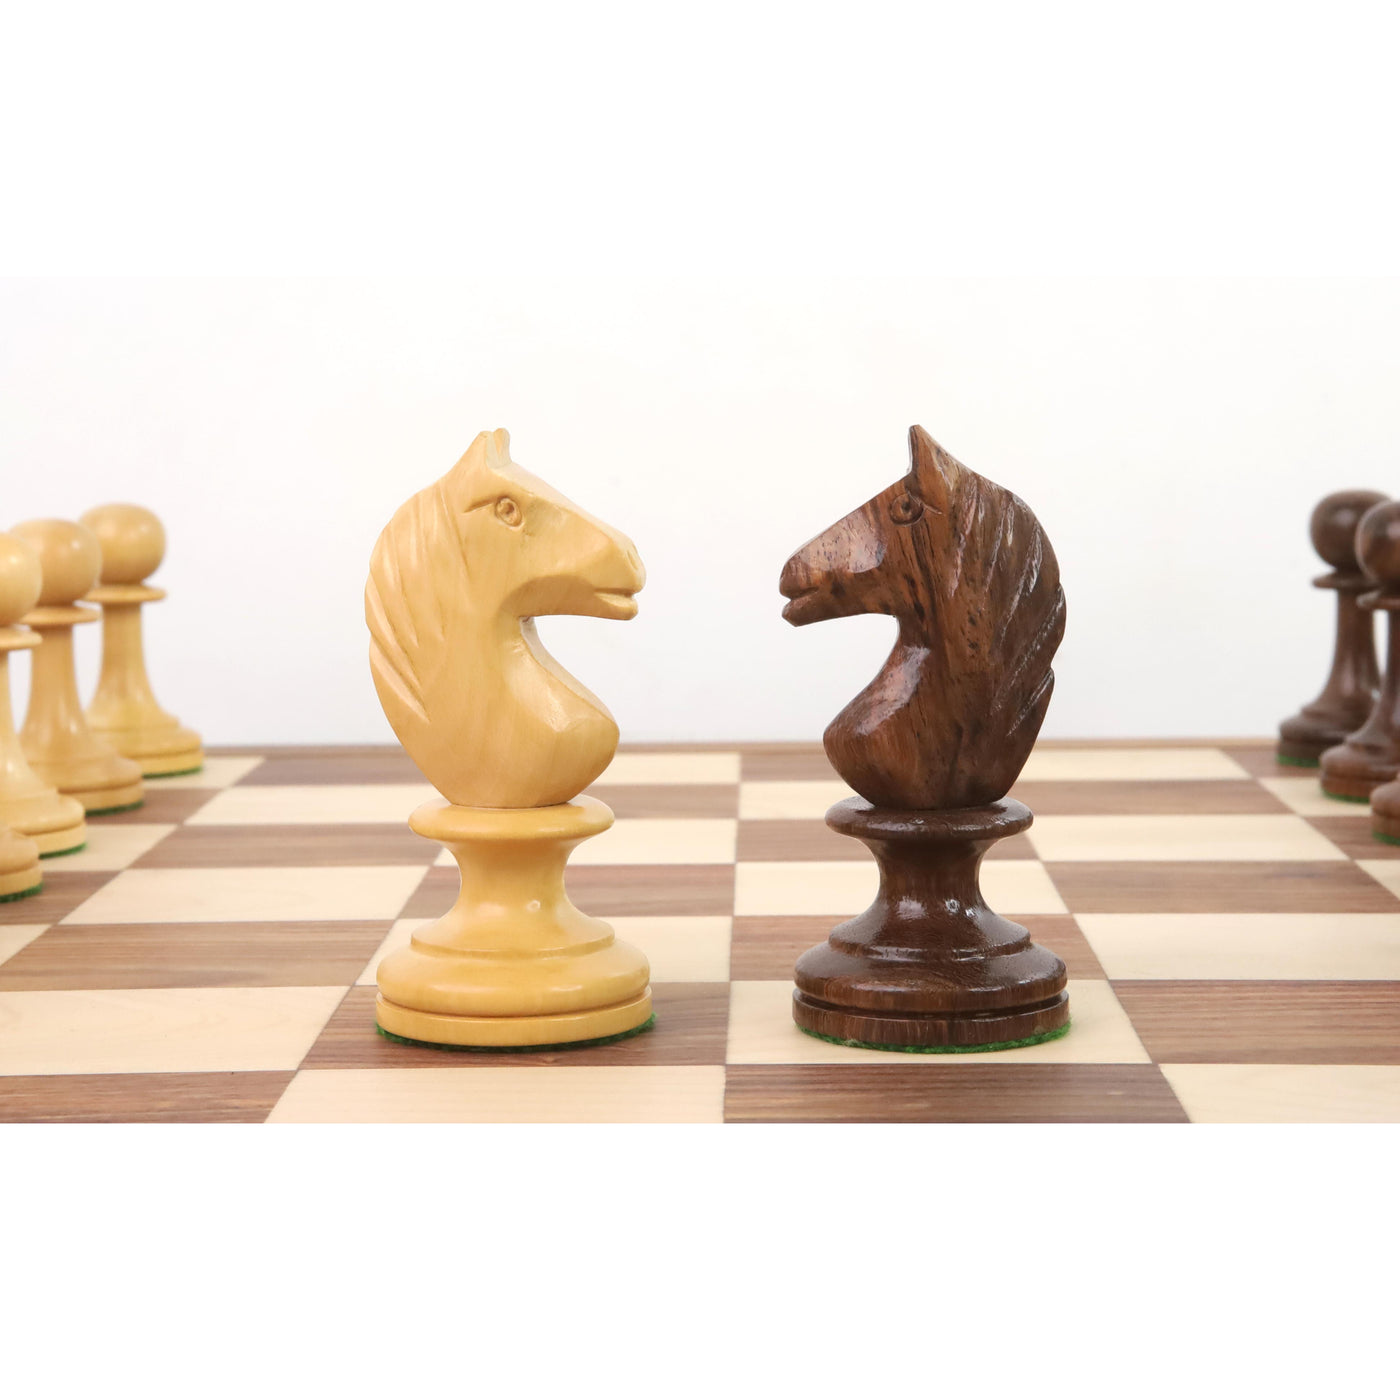 4.8" Averbakh Soviet Russian Chess Set - Chess Pieces Only - Double Weighted Golden Rosewood & Boxwood